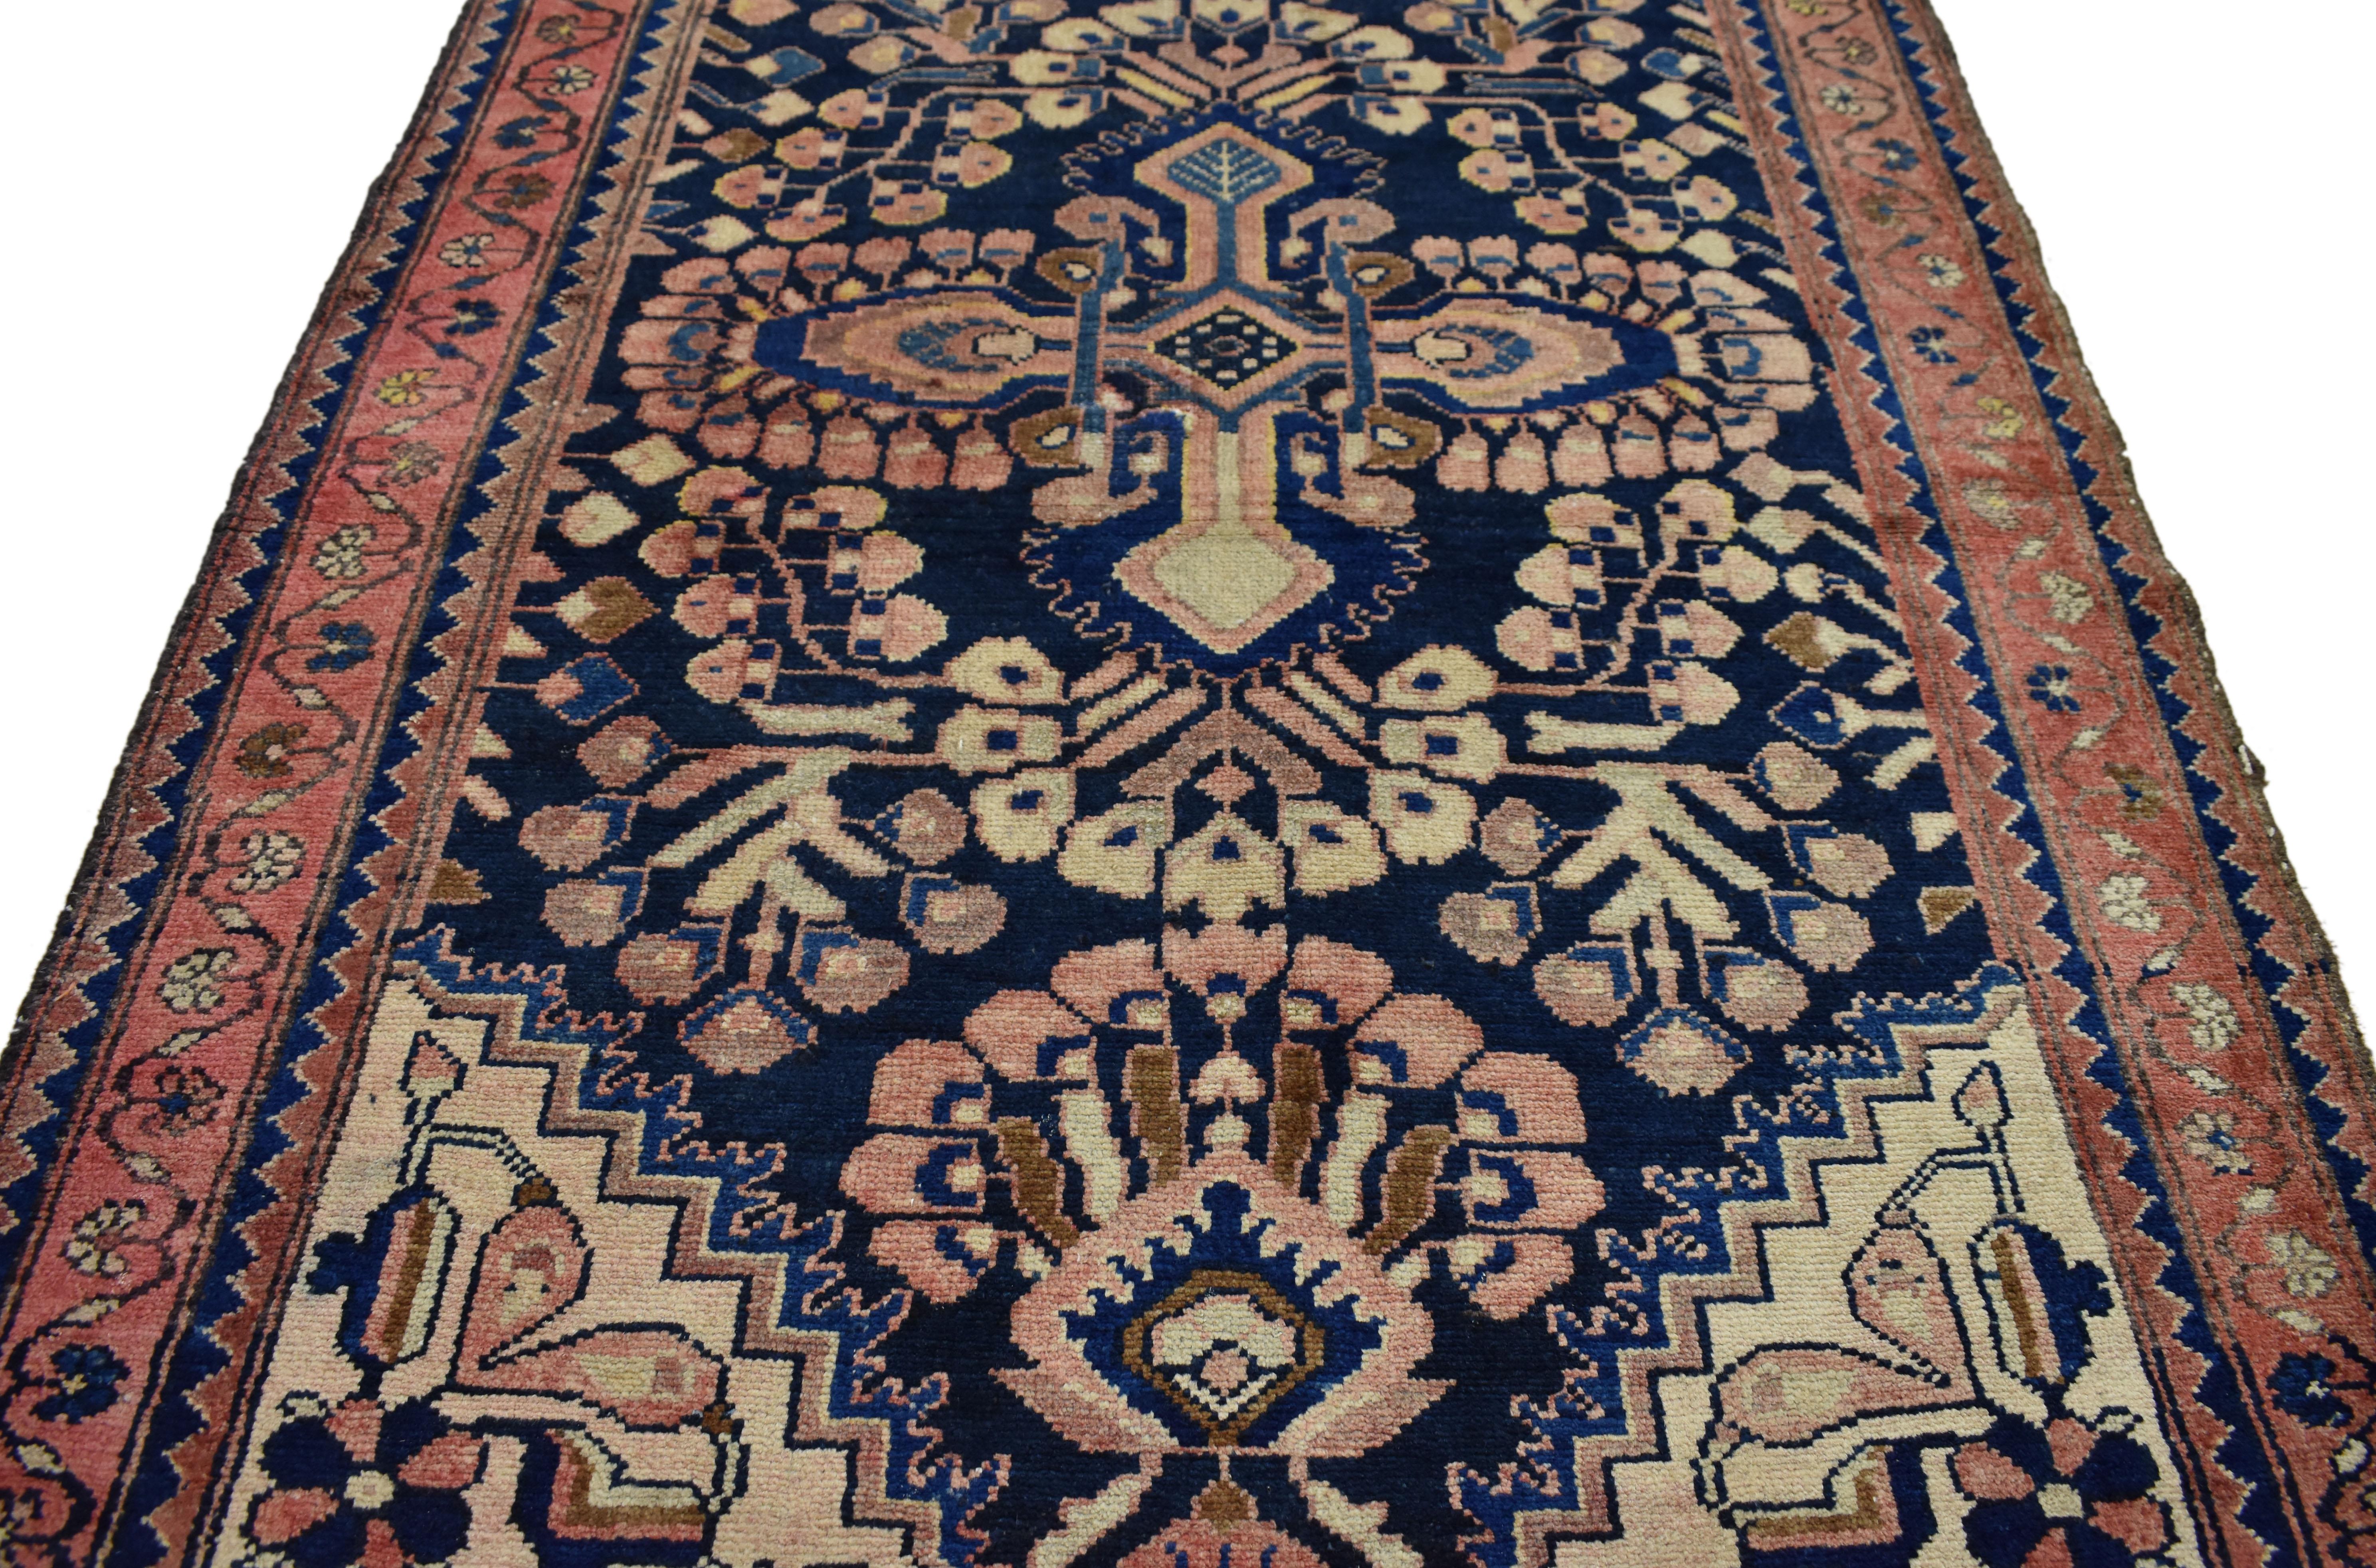 75369, vintage Persian Kasvin Hamadan runner with sarouk design, Hallway runner. This hand-knotted wool vintage Persian Kasvin Hamadan carpet runner with Sarouk design features a bright pink cruciform-style floral pattern on a deep navy-blue field.